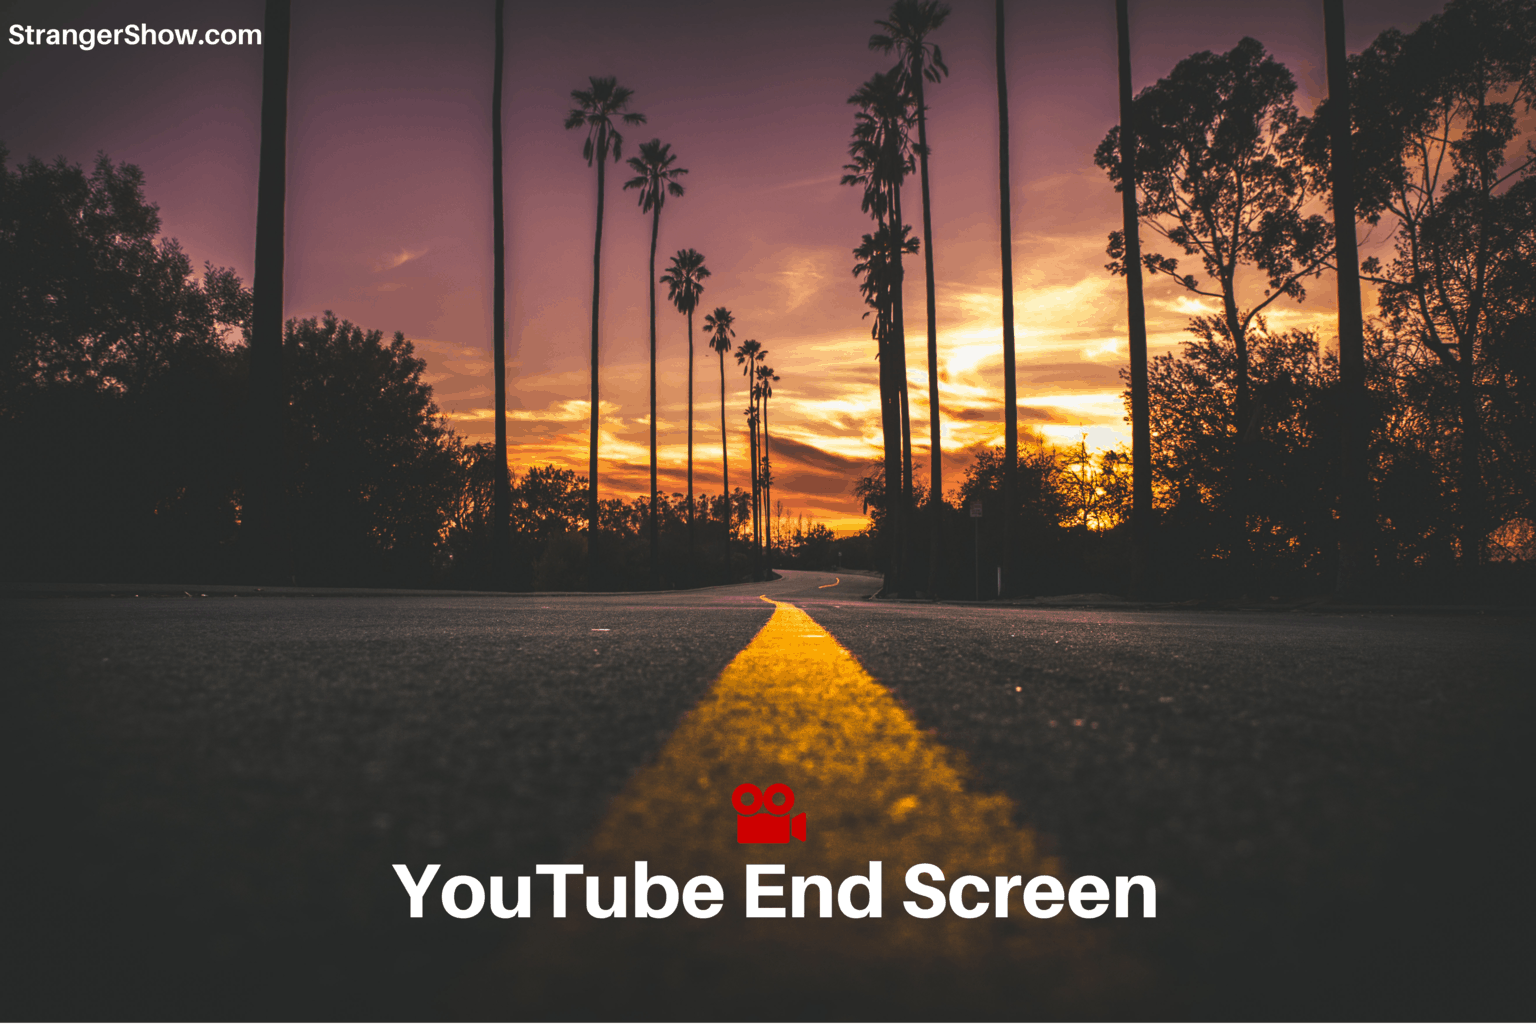 YouTube End Screen introduction